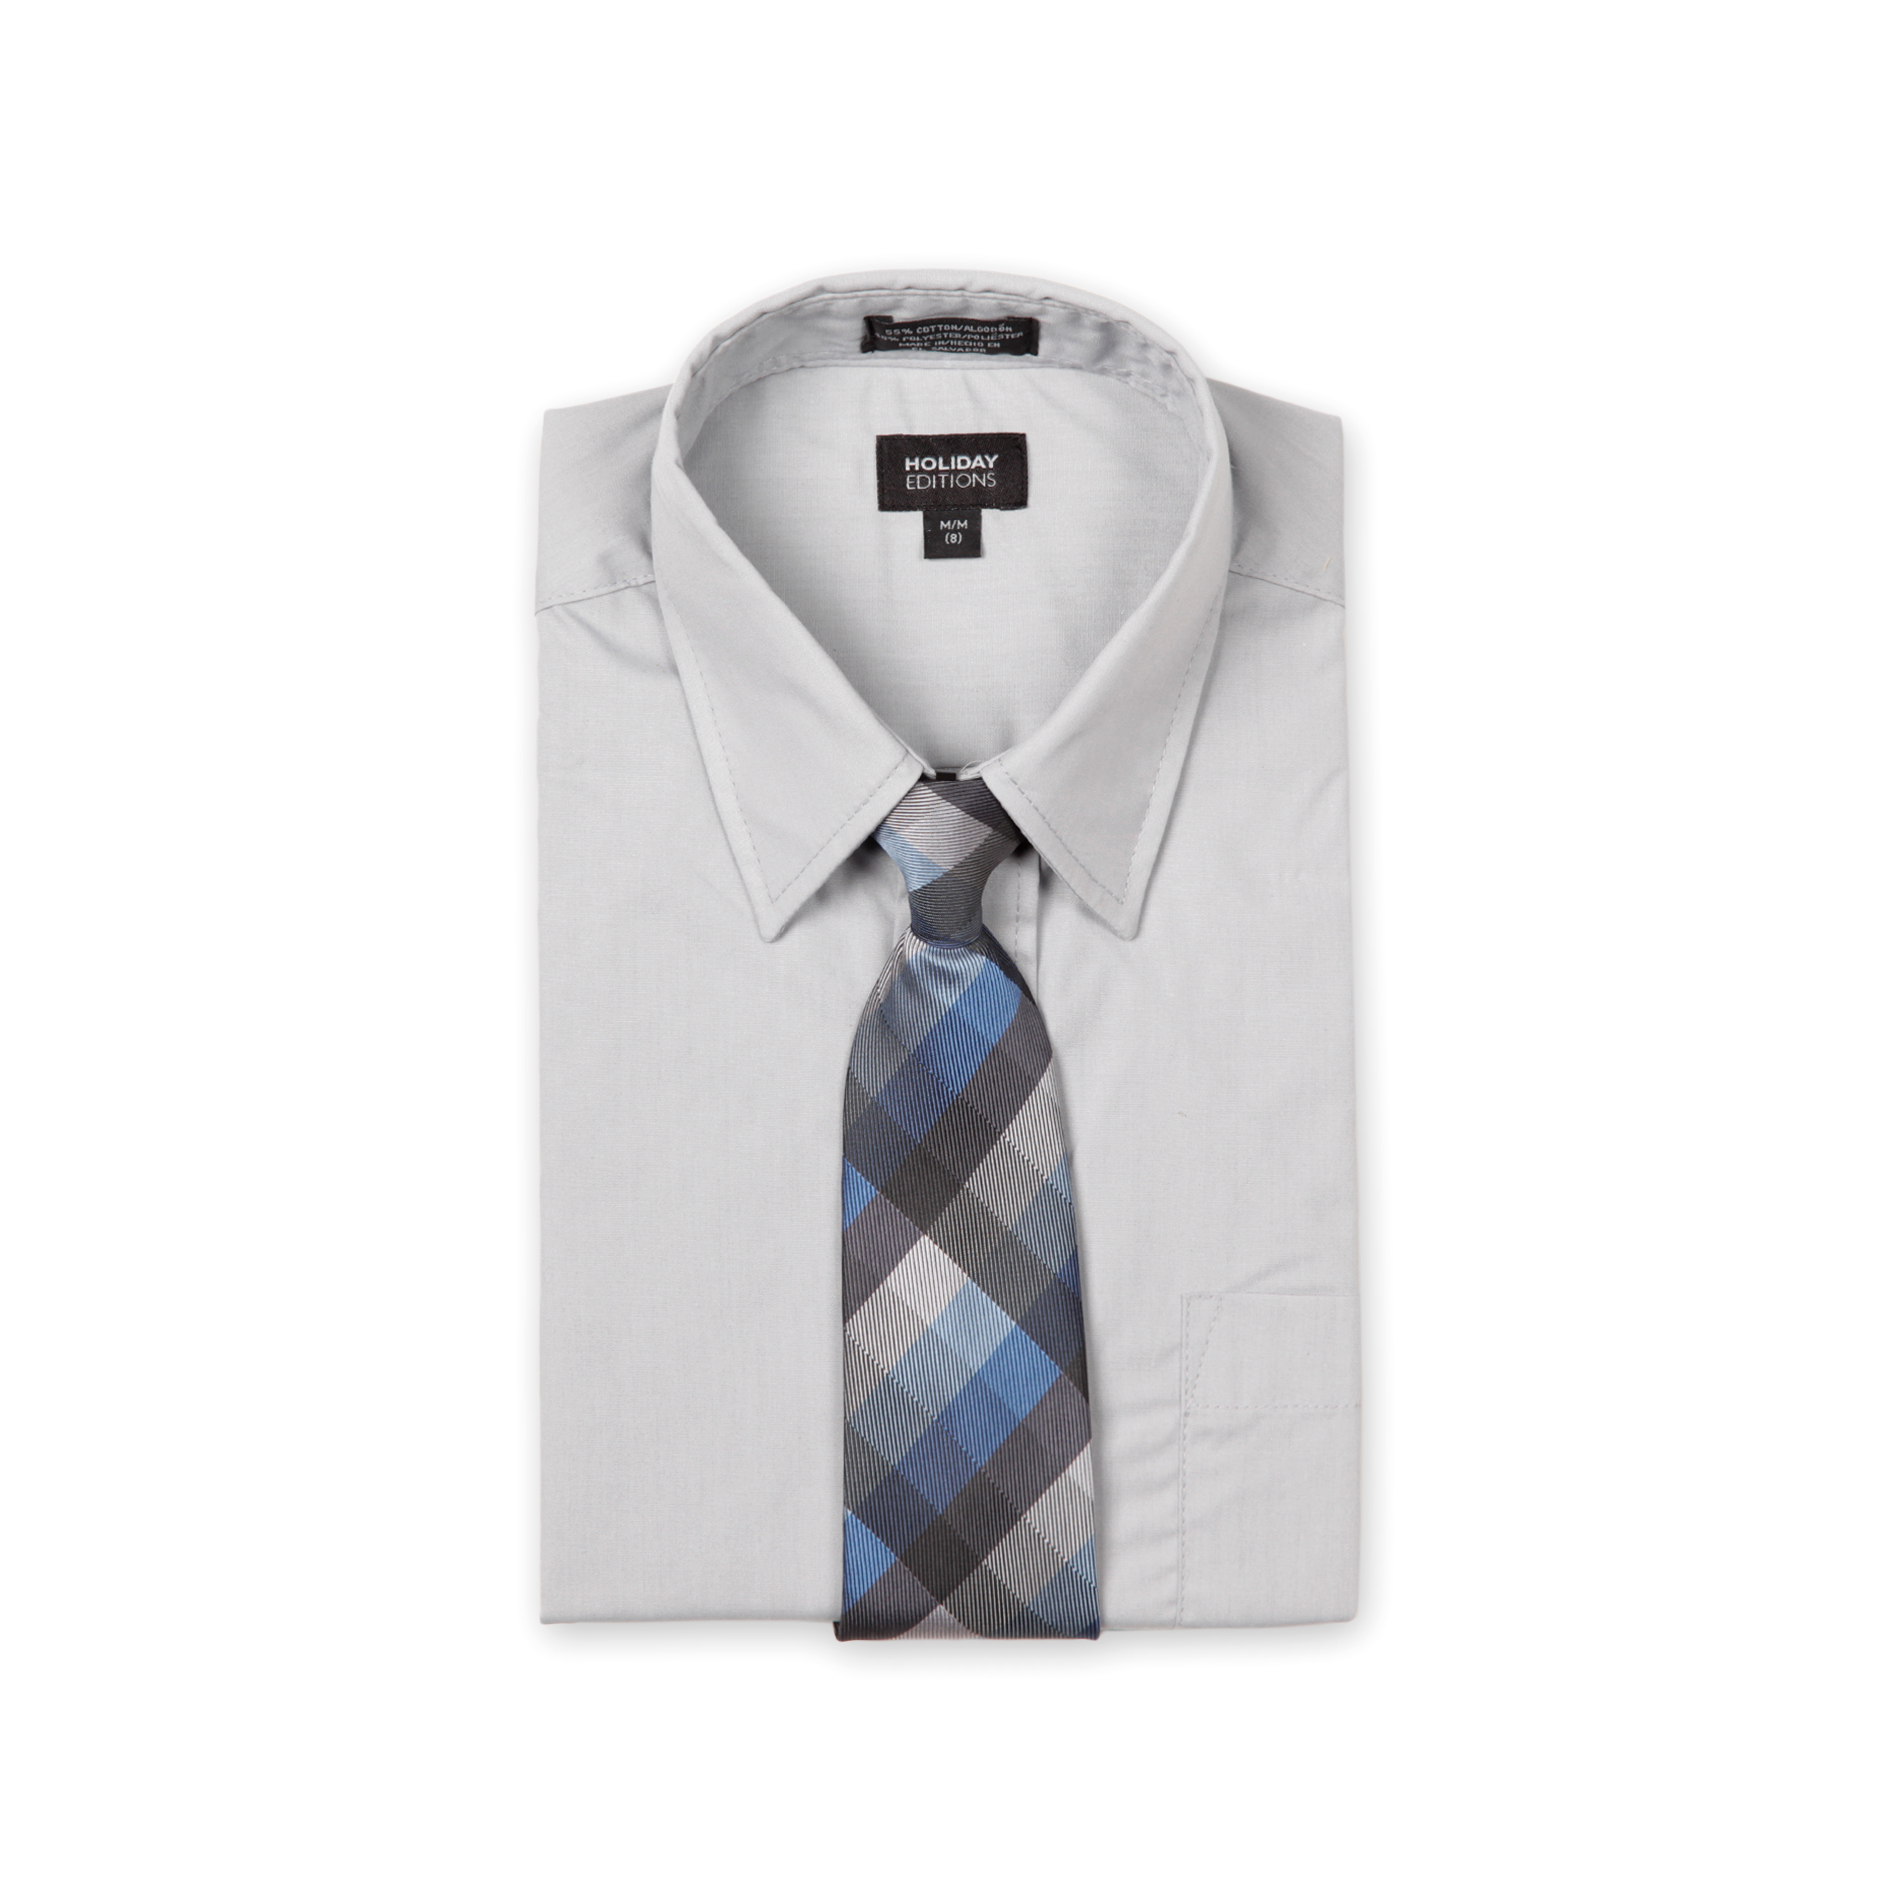 Holiday Editions Boy's Dress Shirt & Tie - Checkered